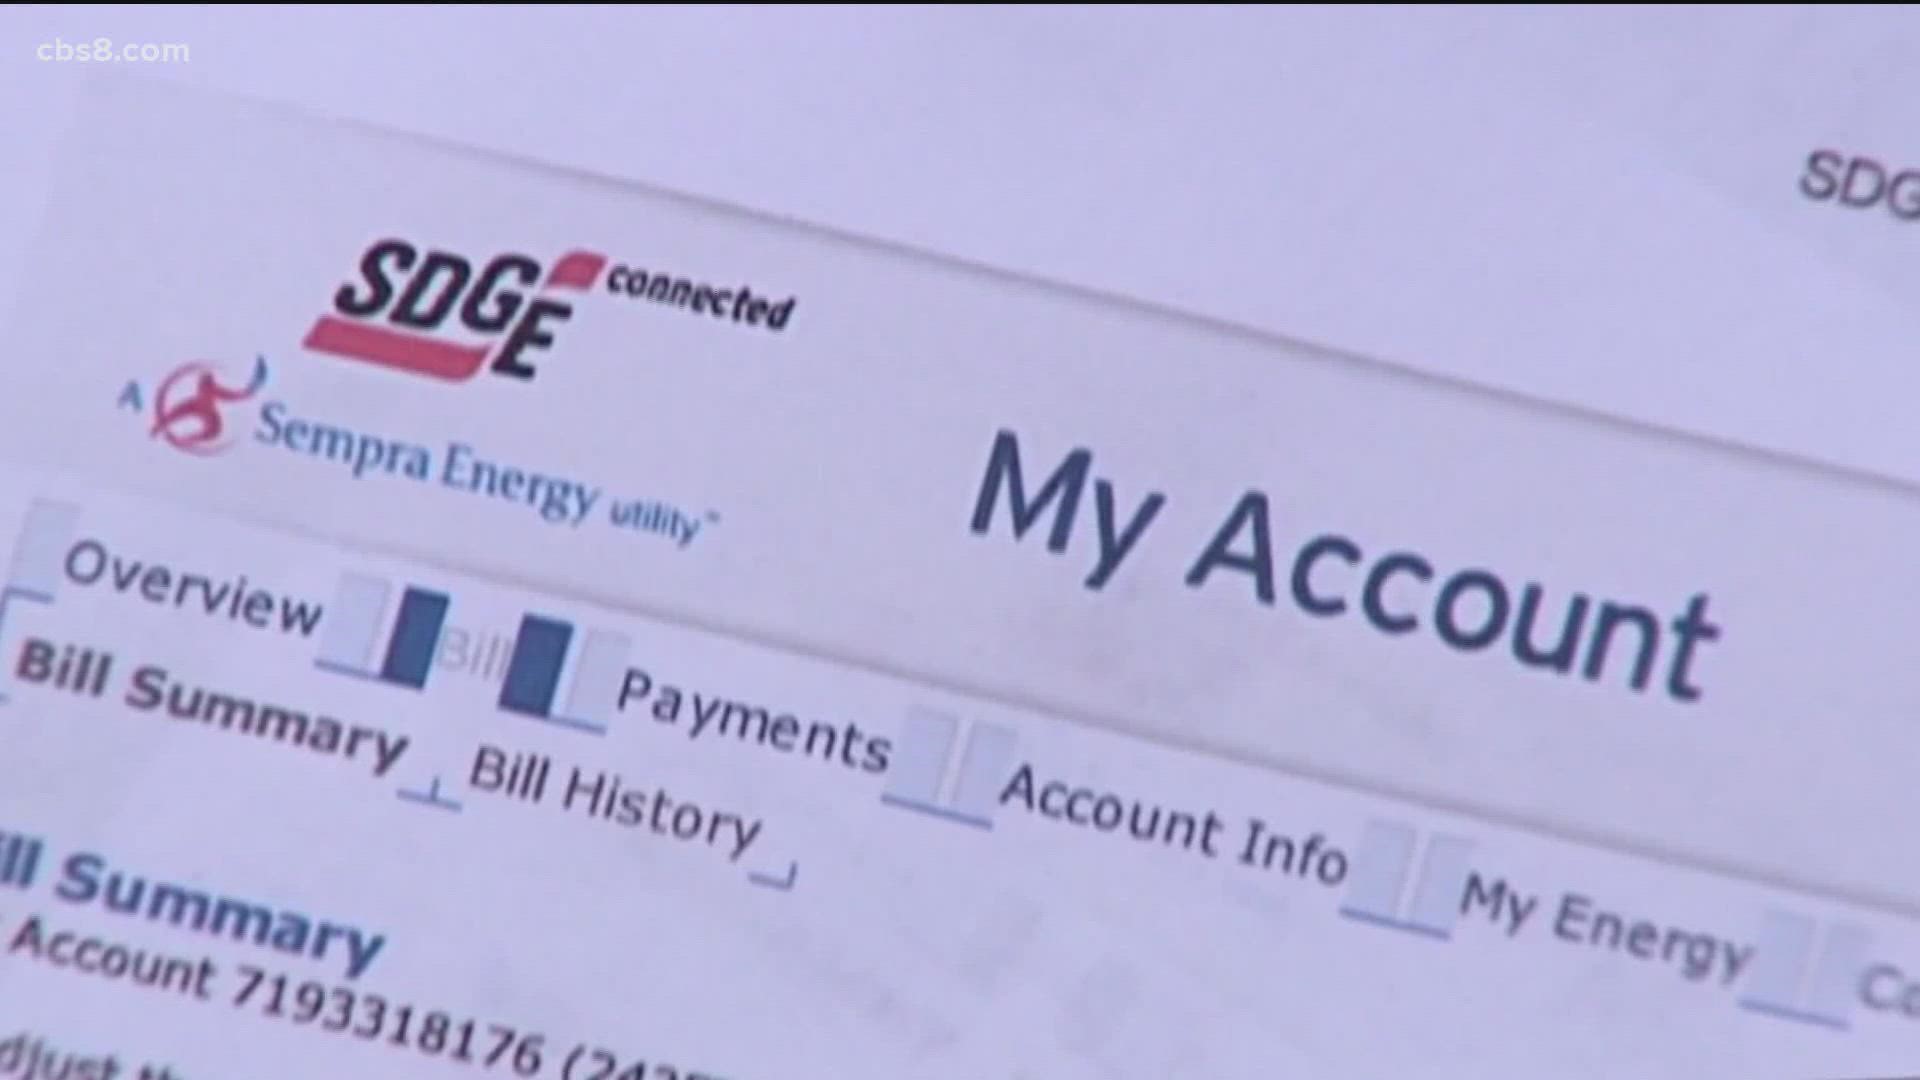 The California Public Utilities Commission admits it has received hundreds of calls from SDG&E customers concerned about billing.